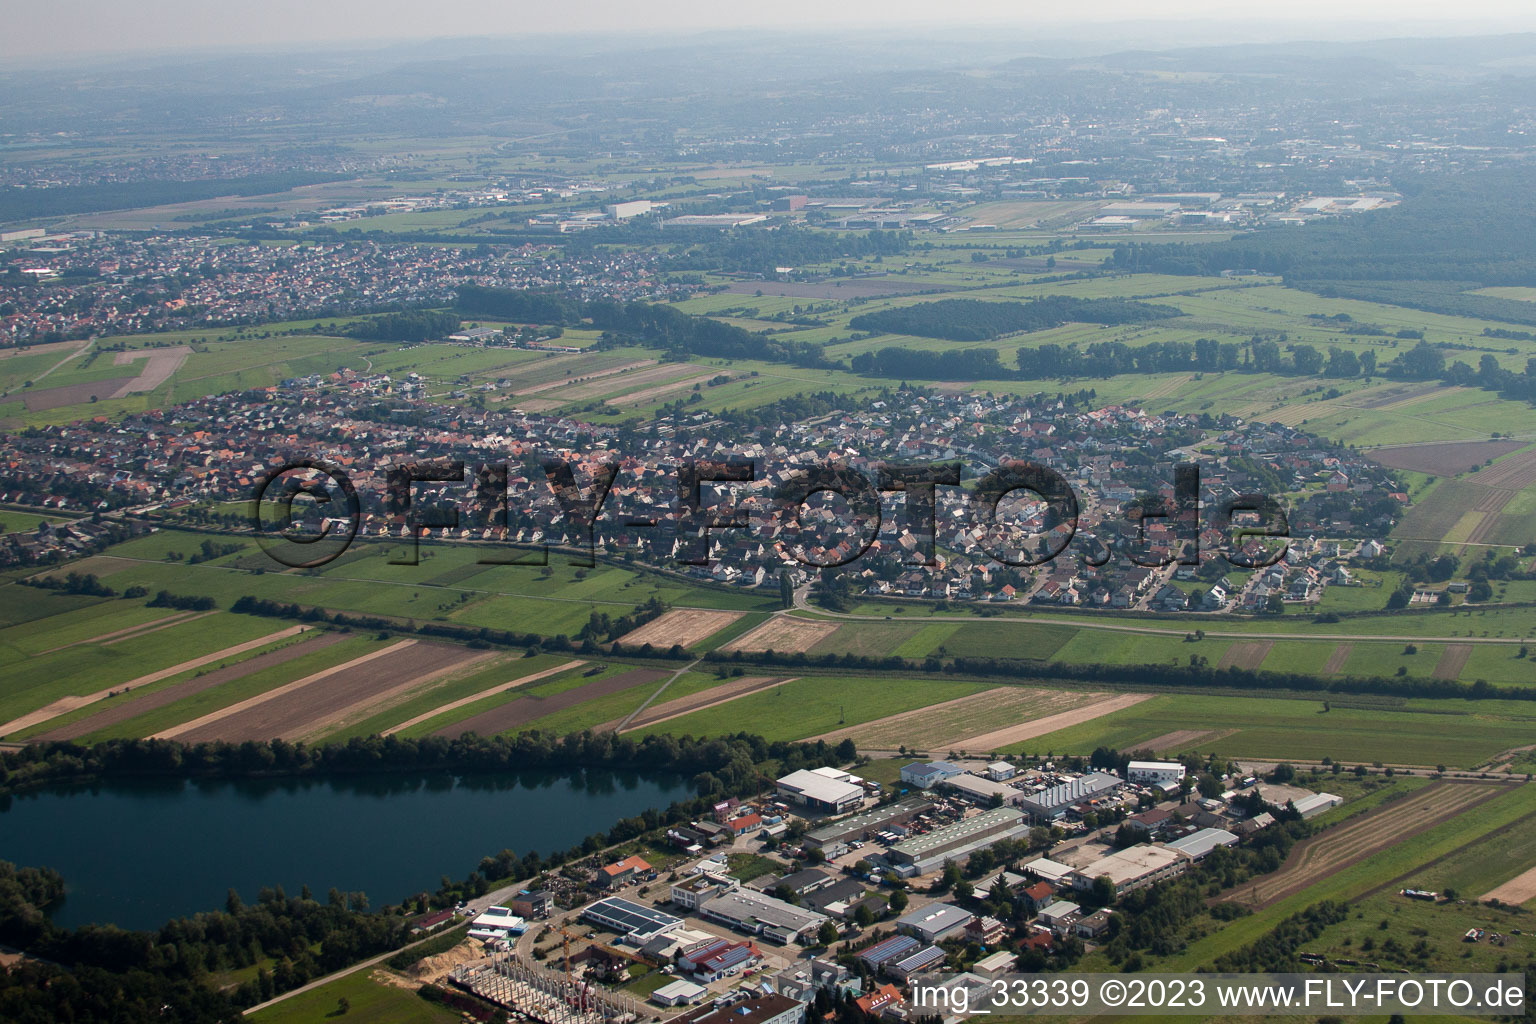 Techacke industrial area in the district Neuthard in Karlsdorf-Neuthard in the state Baden-Wuerttemberg, Germany